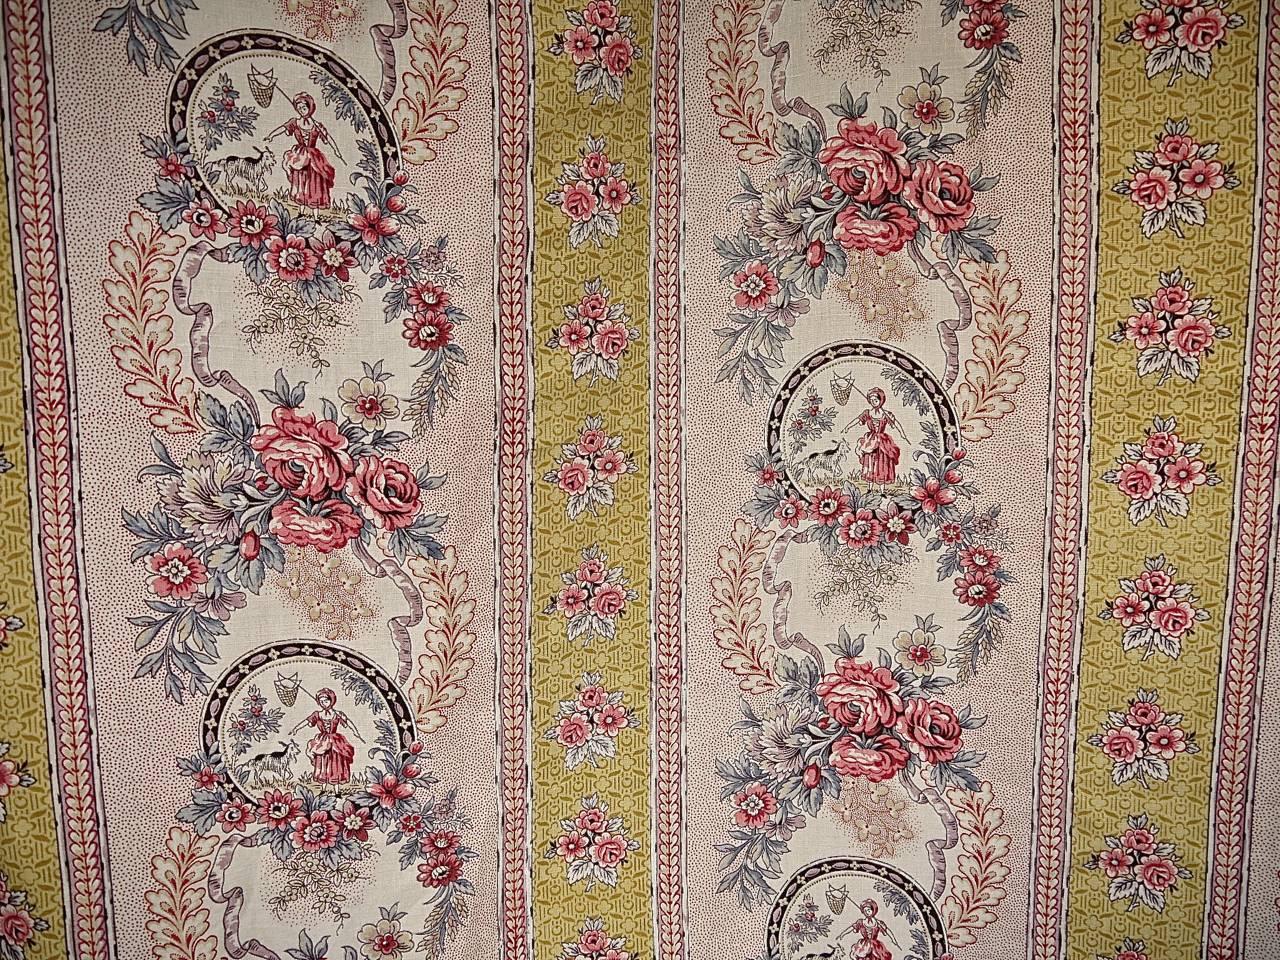 French early 20th century circa 1900s-1910s linen length printed with medallions of a girl and a goat surrounded by roses and ribbons on a picotage ground with alternating bands of yellow.